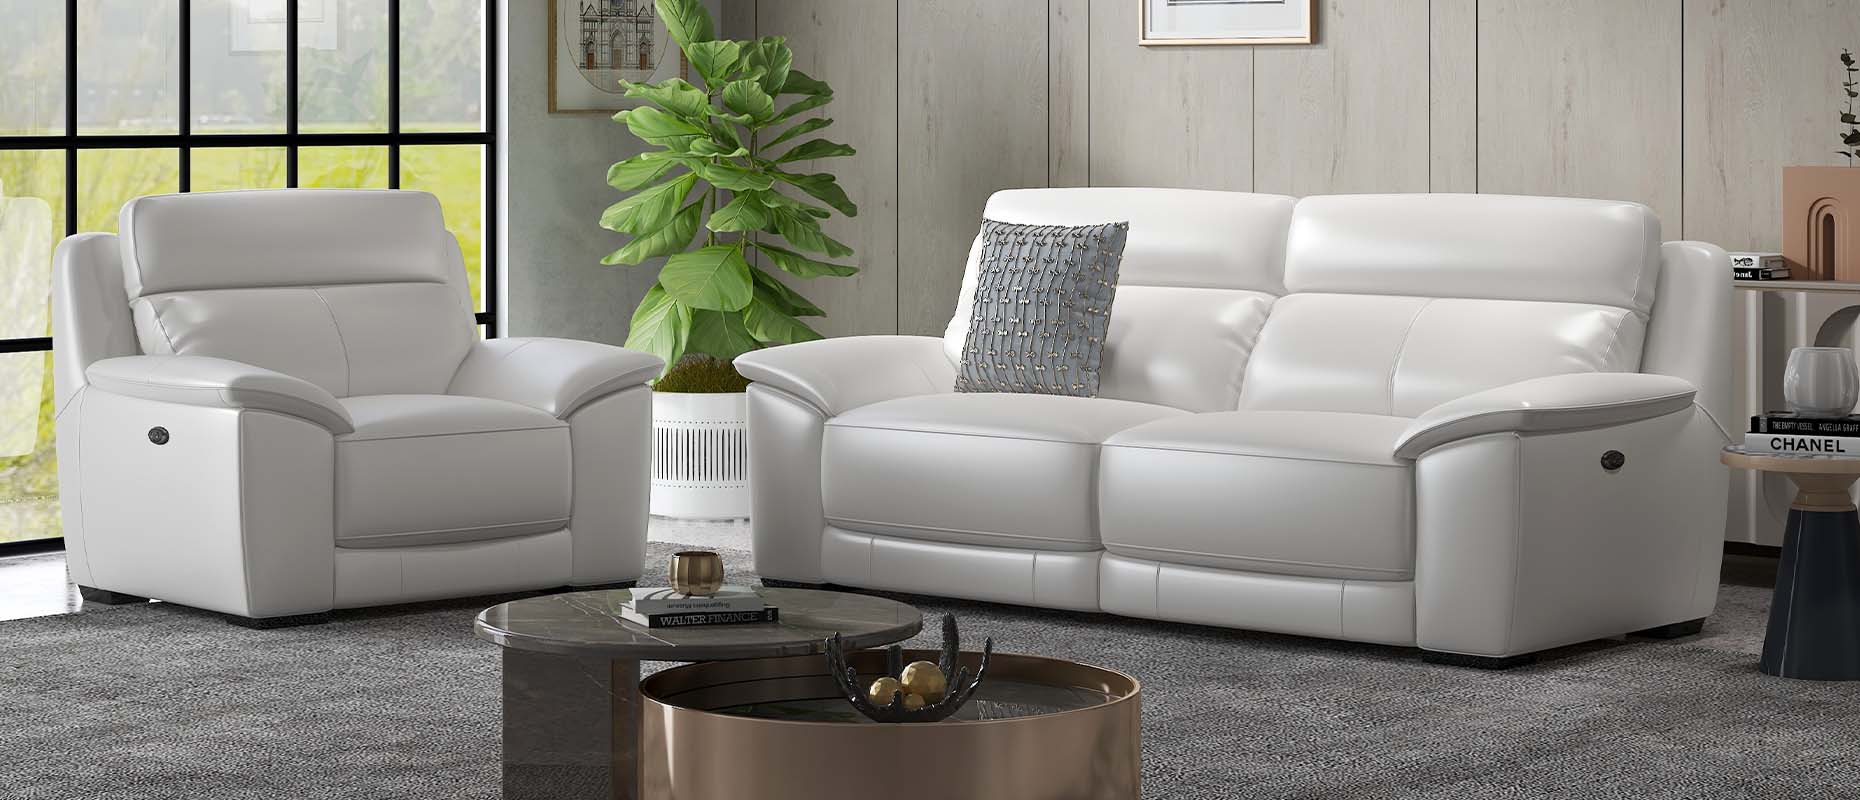 Kick Sofa collection at Forrest Furnishing